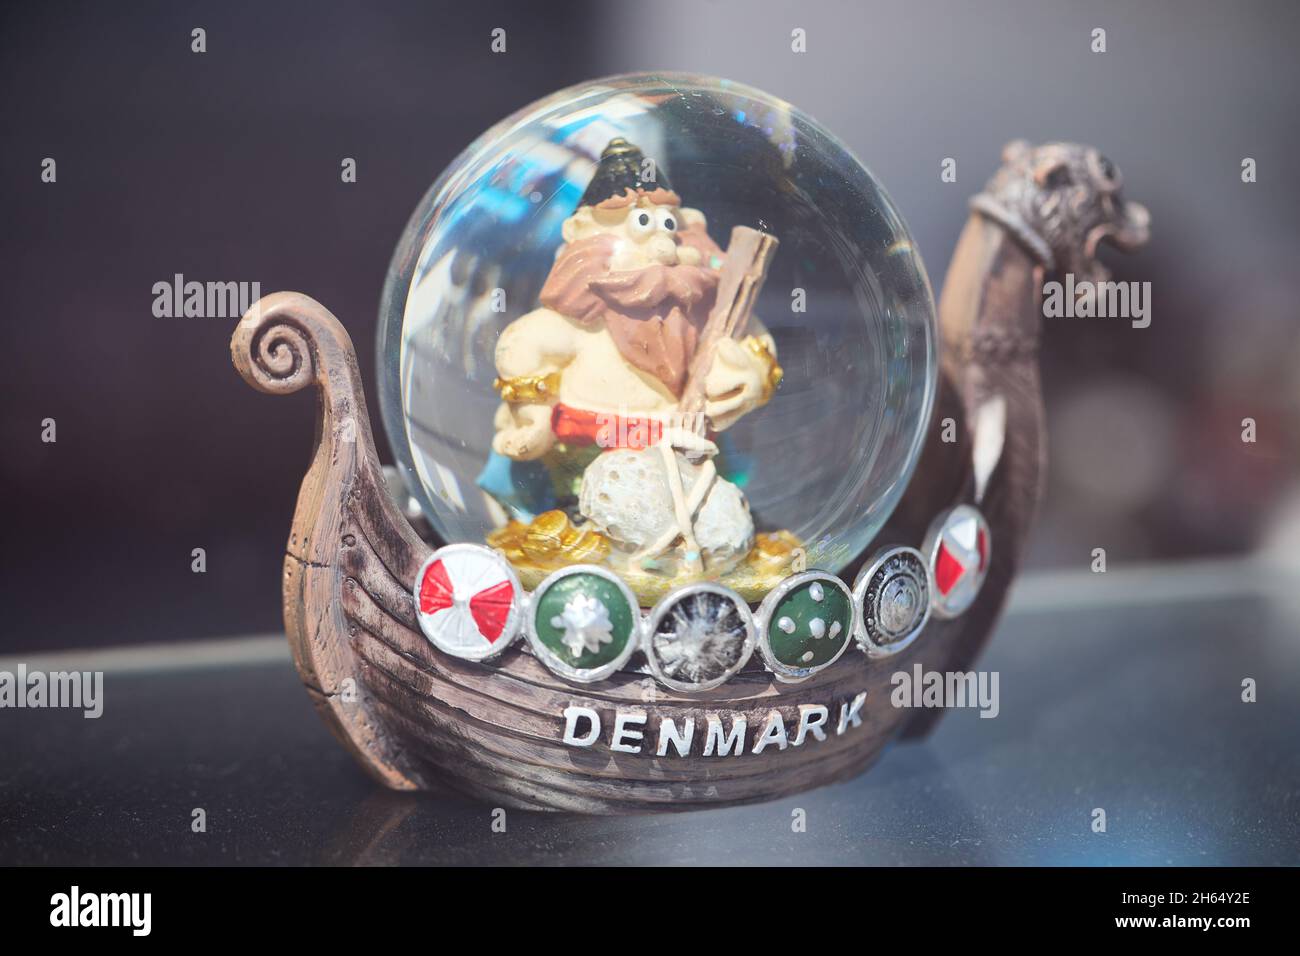 Glass sphere ornament with viking and viking ship, inscribed 'Denmark' Stock Photo